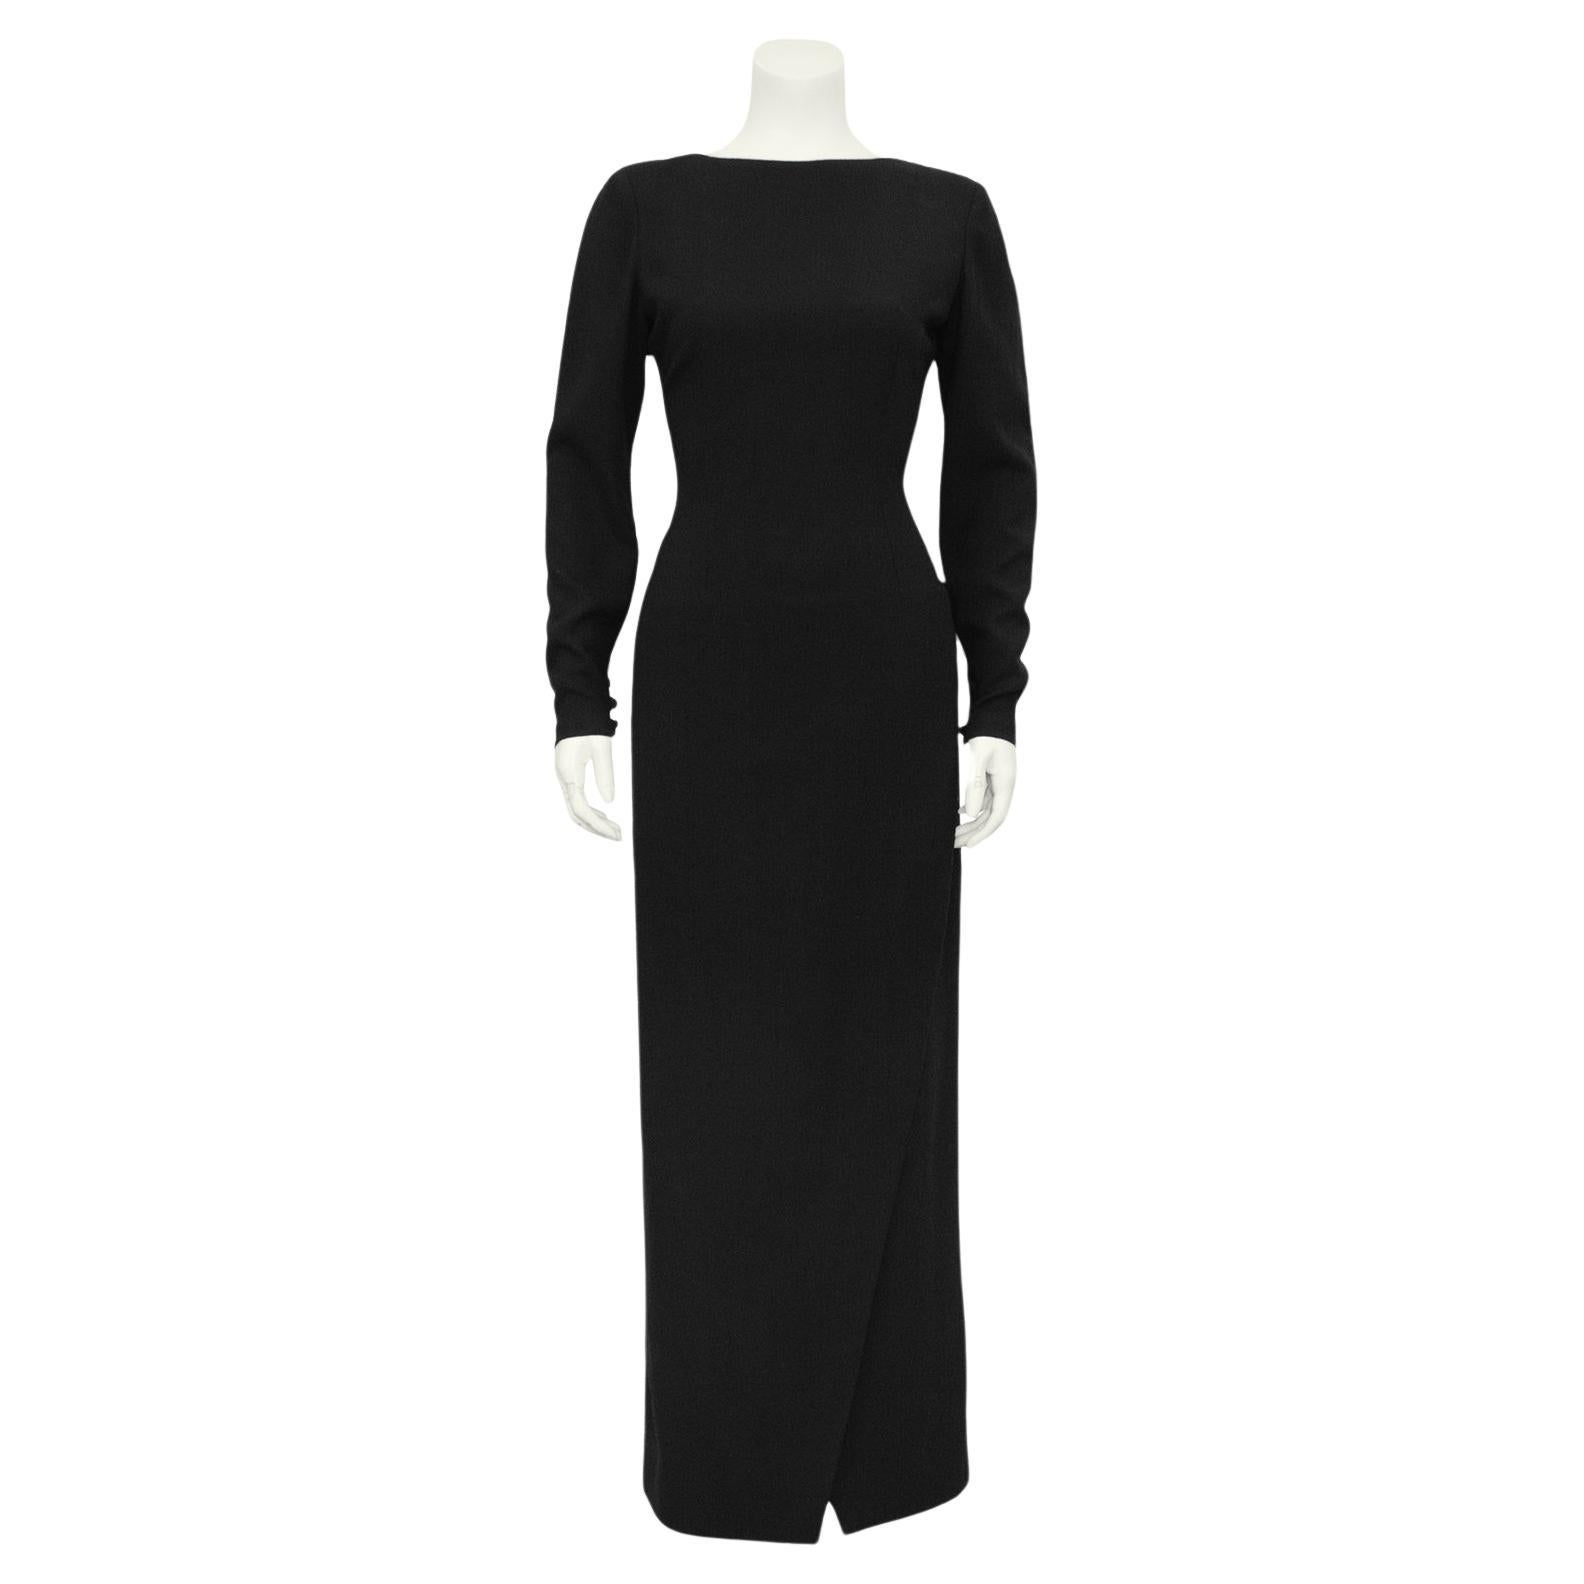 Incredibly chic fall/winter Bill Blass black wool crepe evening gown from the 1970s. Minimal and elegant front with a boat neckline and long sleeves. Fitted through the waist with a floor length wrap style column skirt. The back features a large